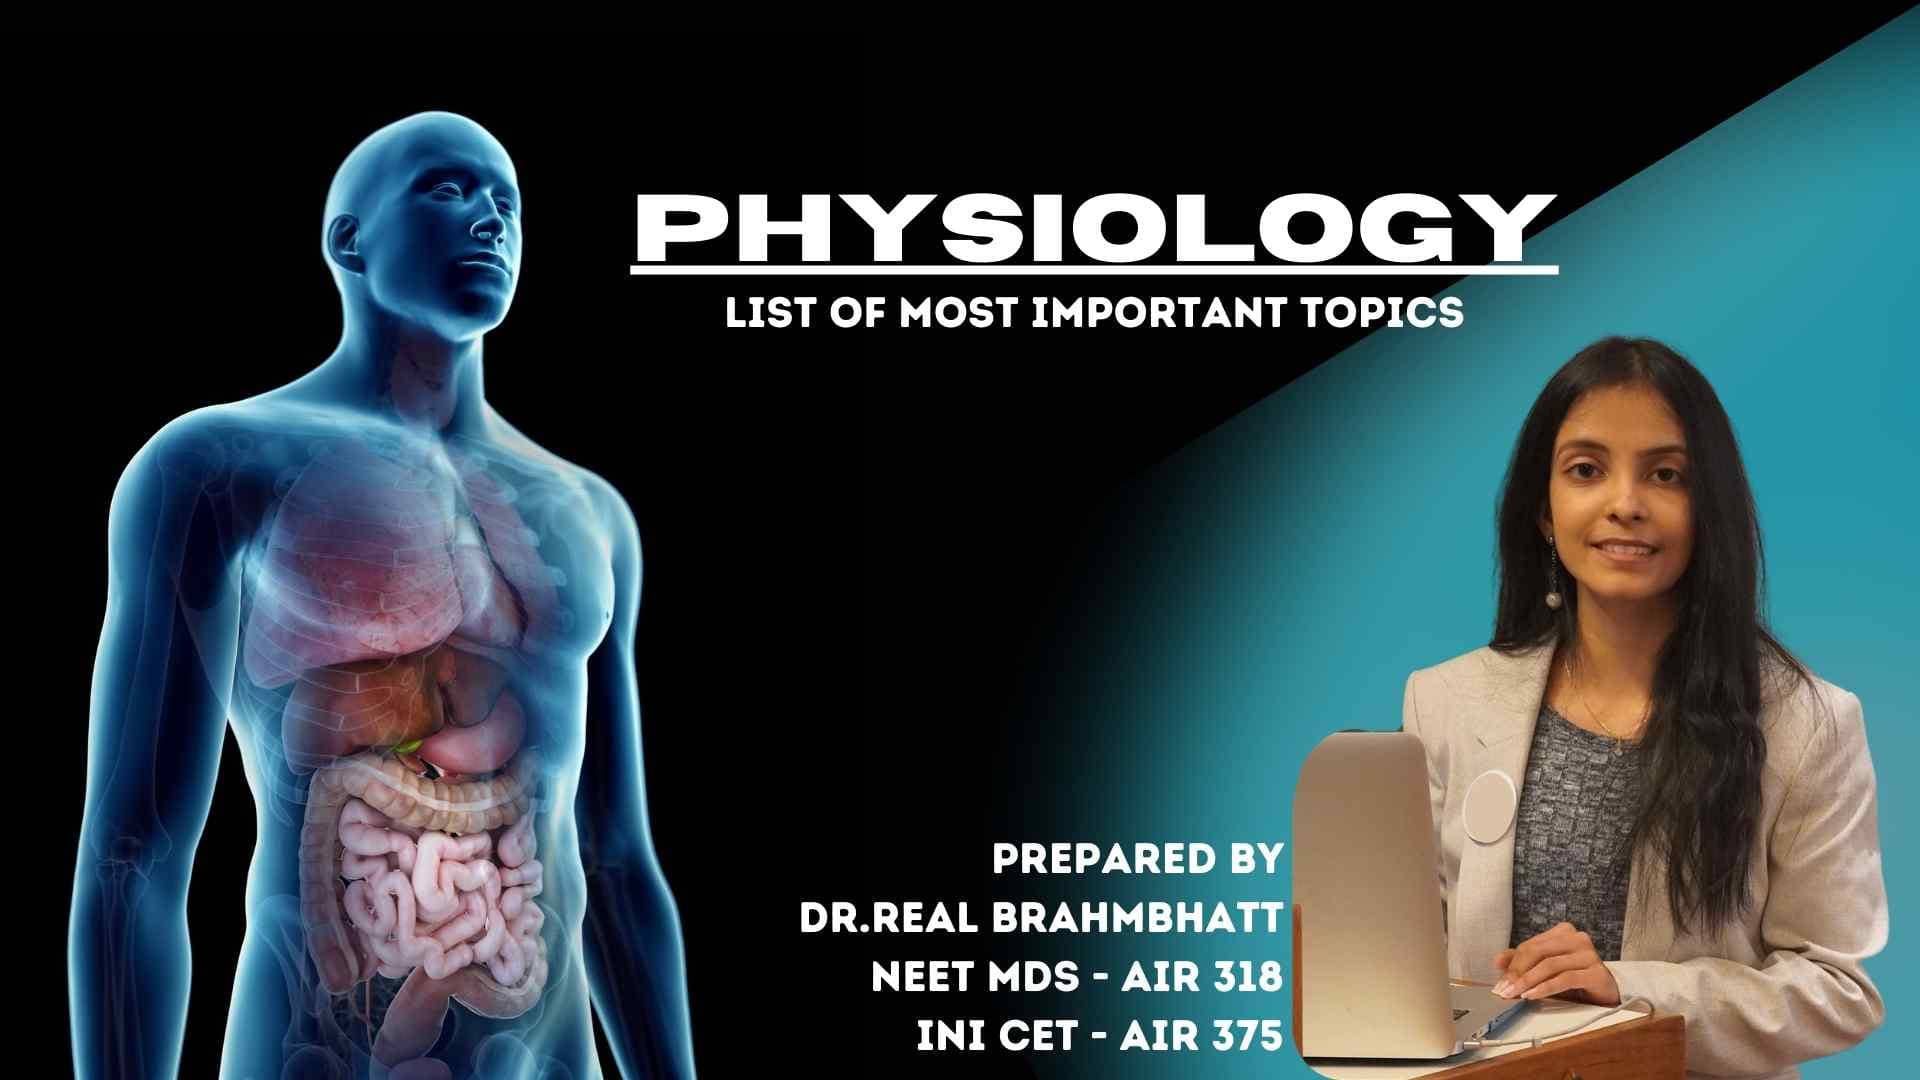 physiology for neet mds